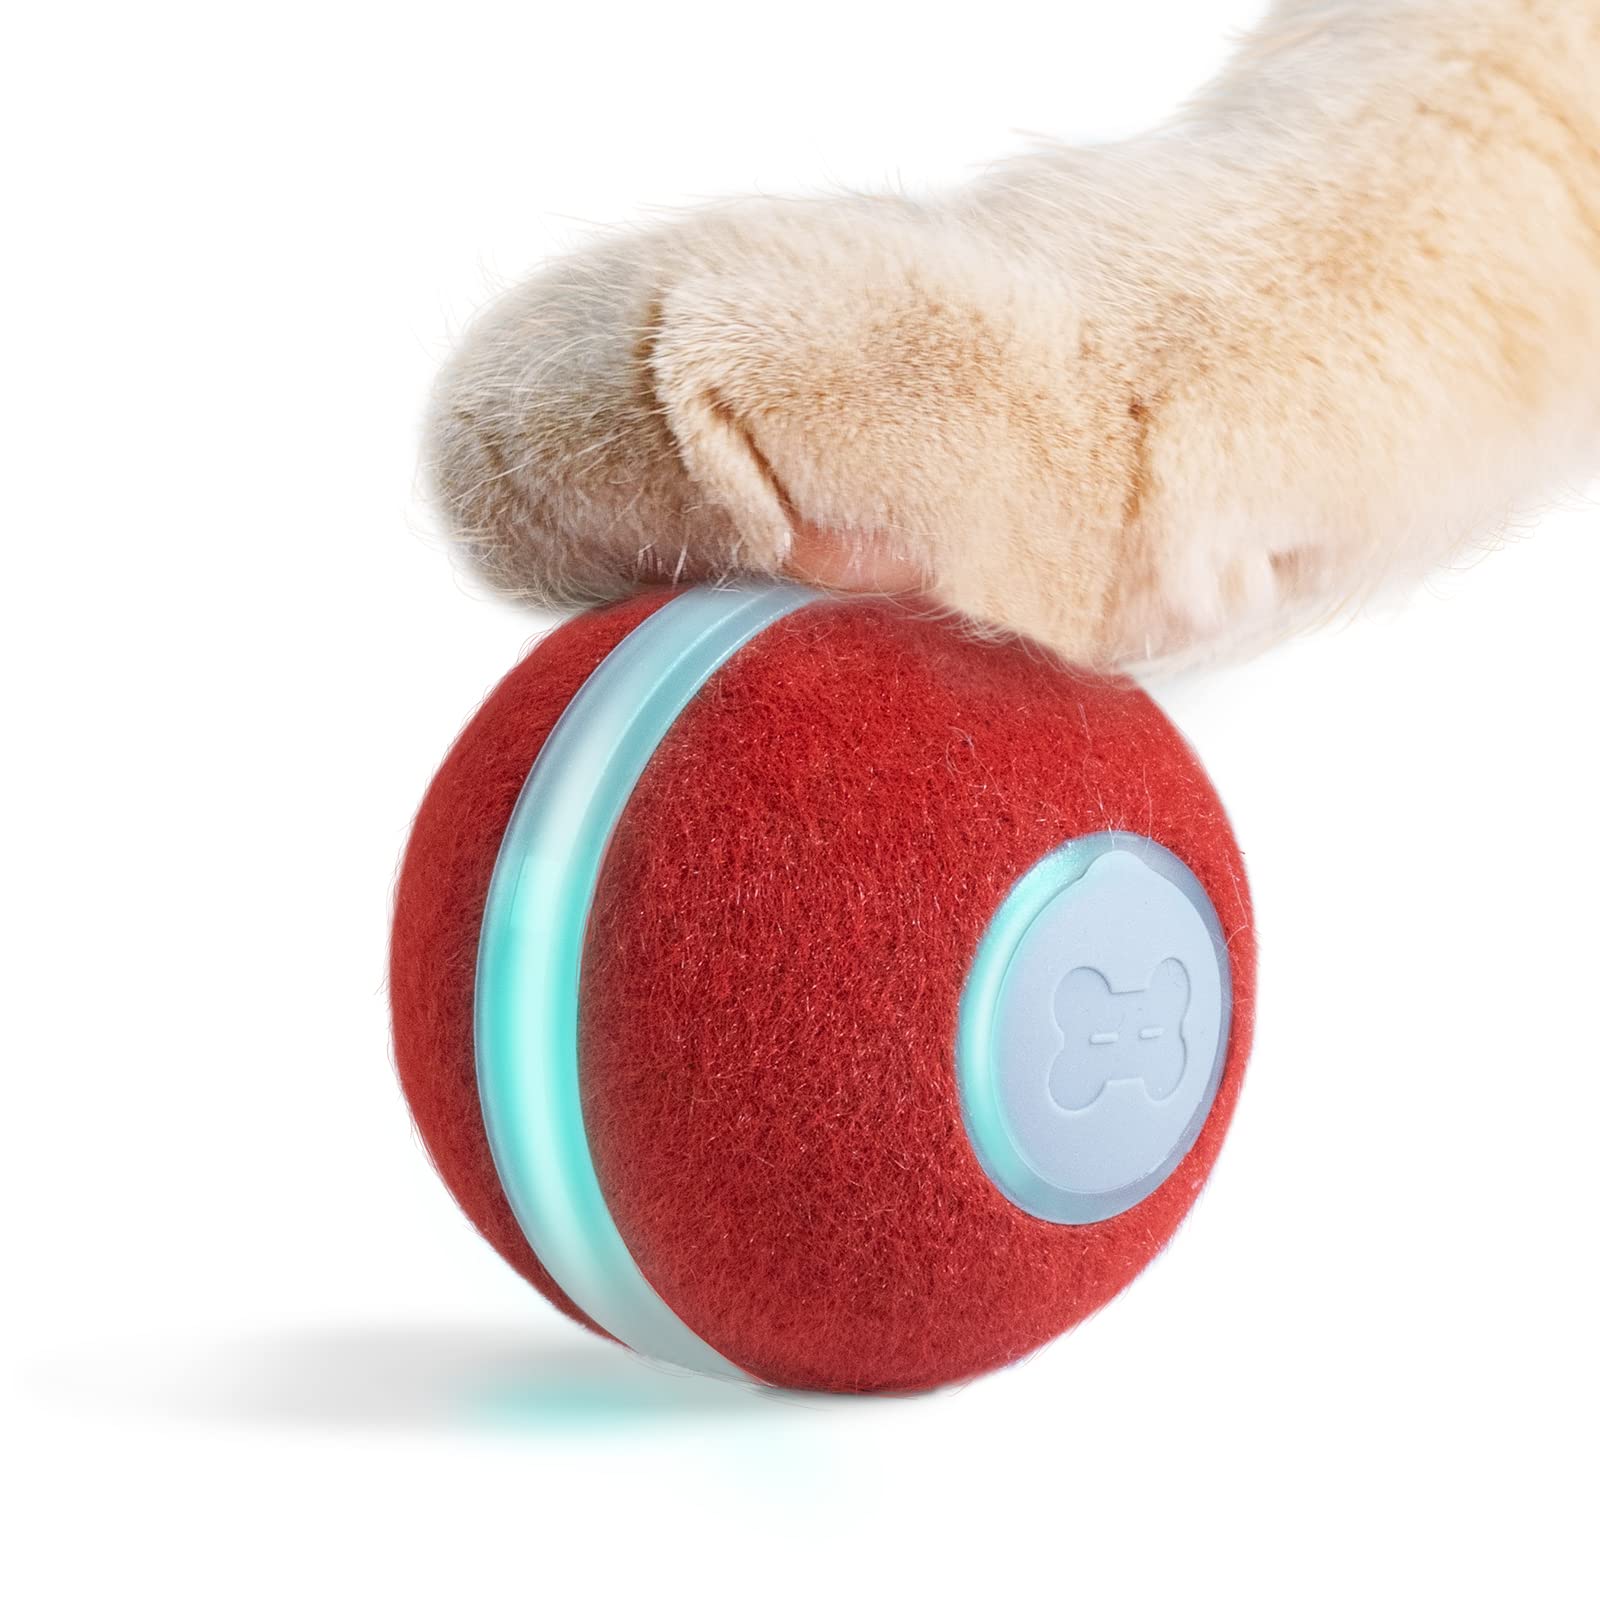 wickedbone is the smart dog toy to cure your puppy's anxiety